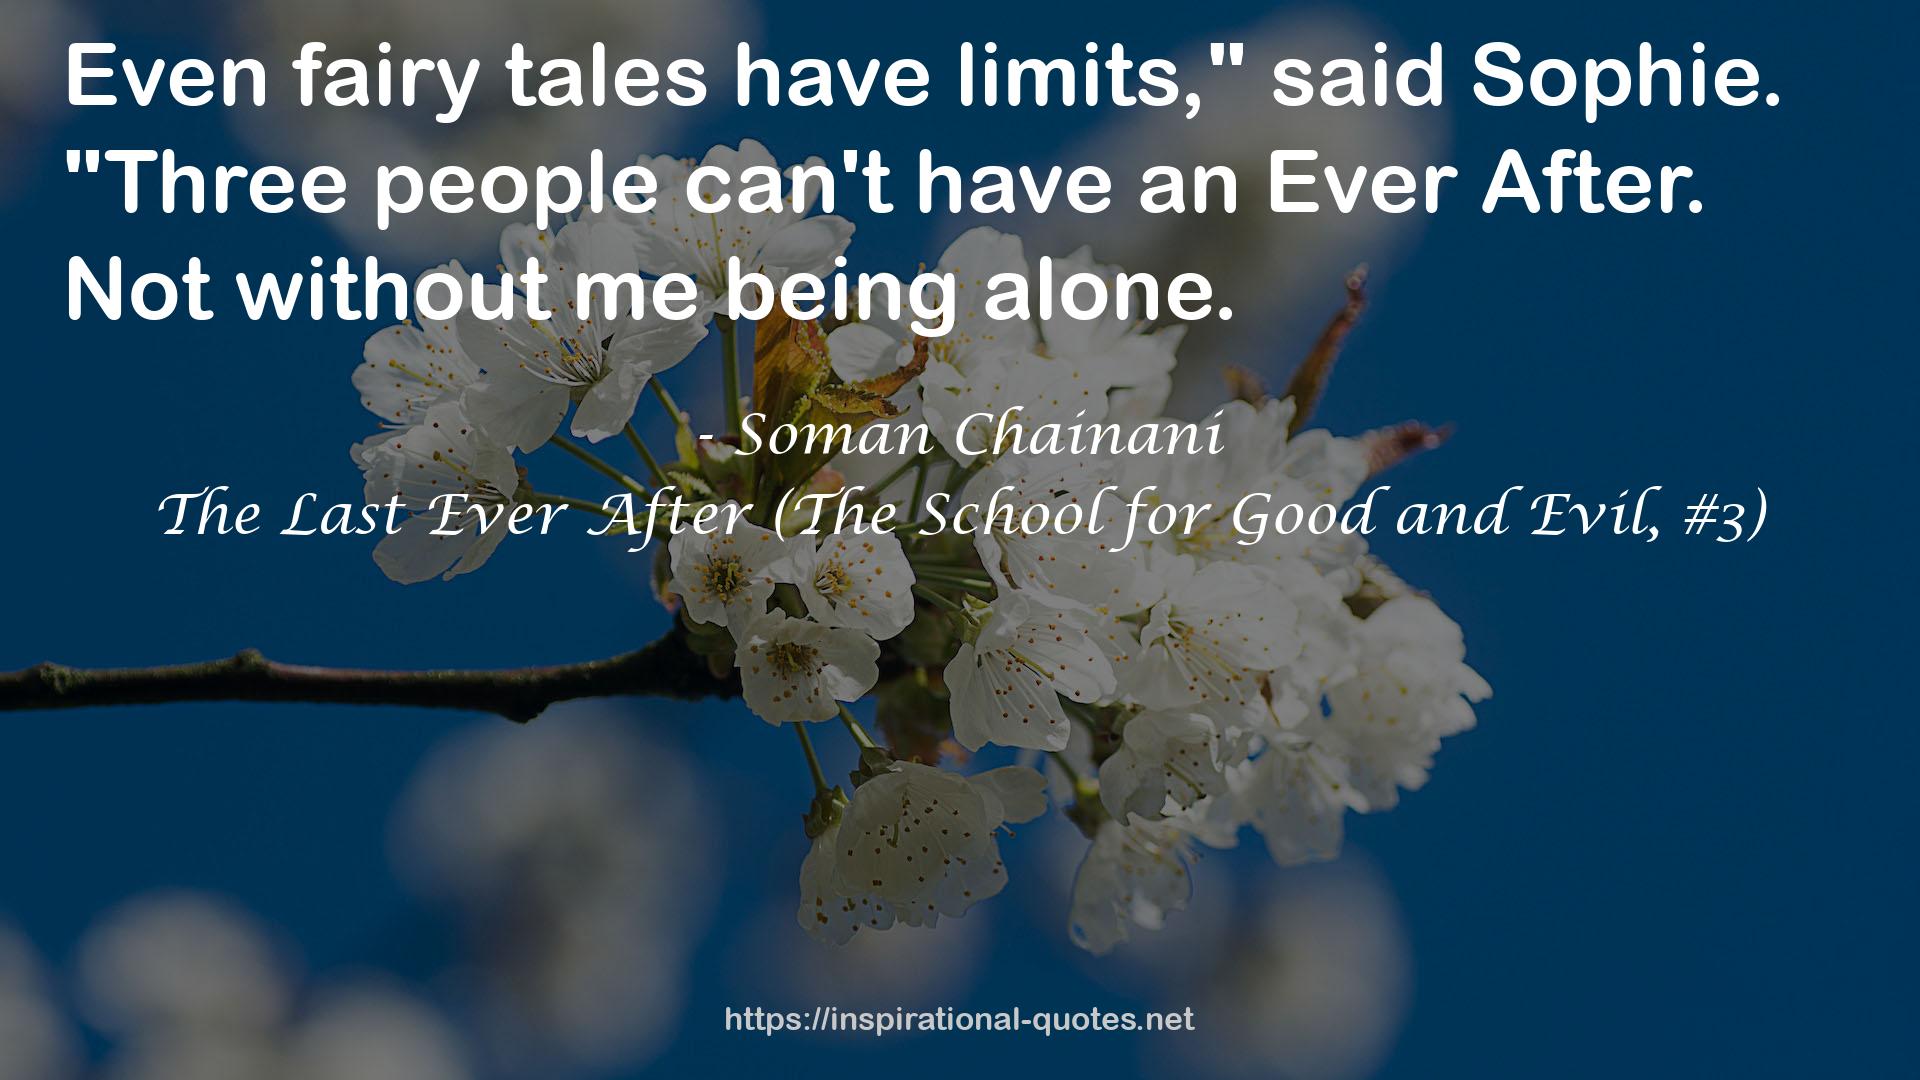 The Last Ever After (The School for Good and Evil, #3) QUOTES